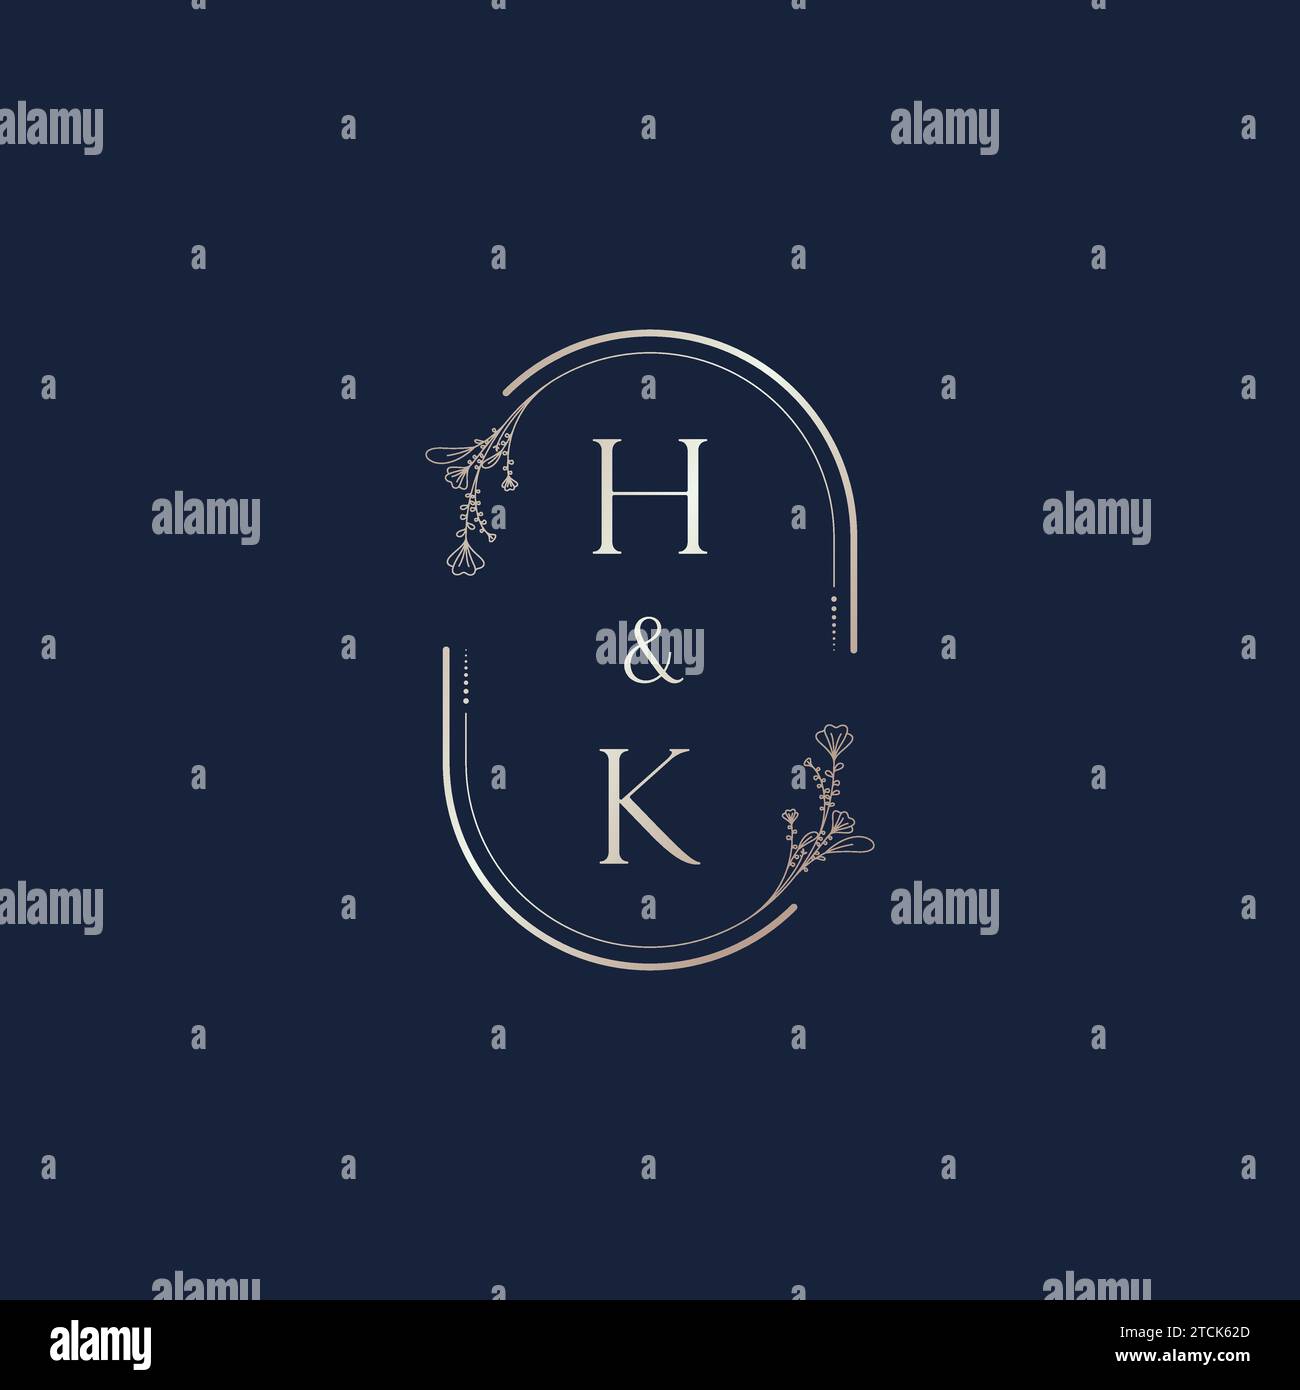 HK wedding initial logo letters in high quality professional design that will print well across any print media Stock Vector